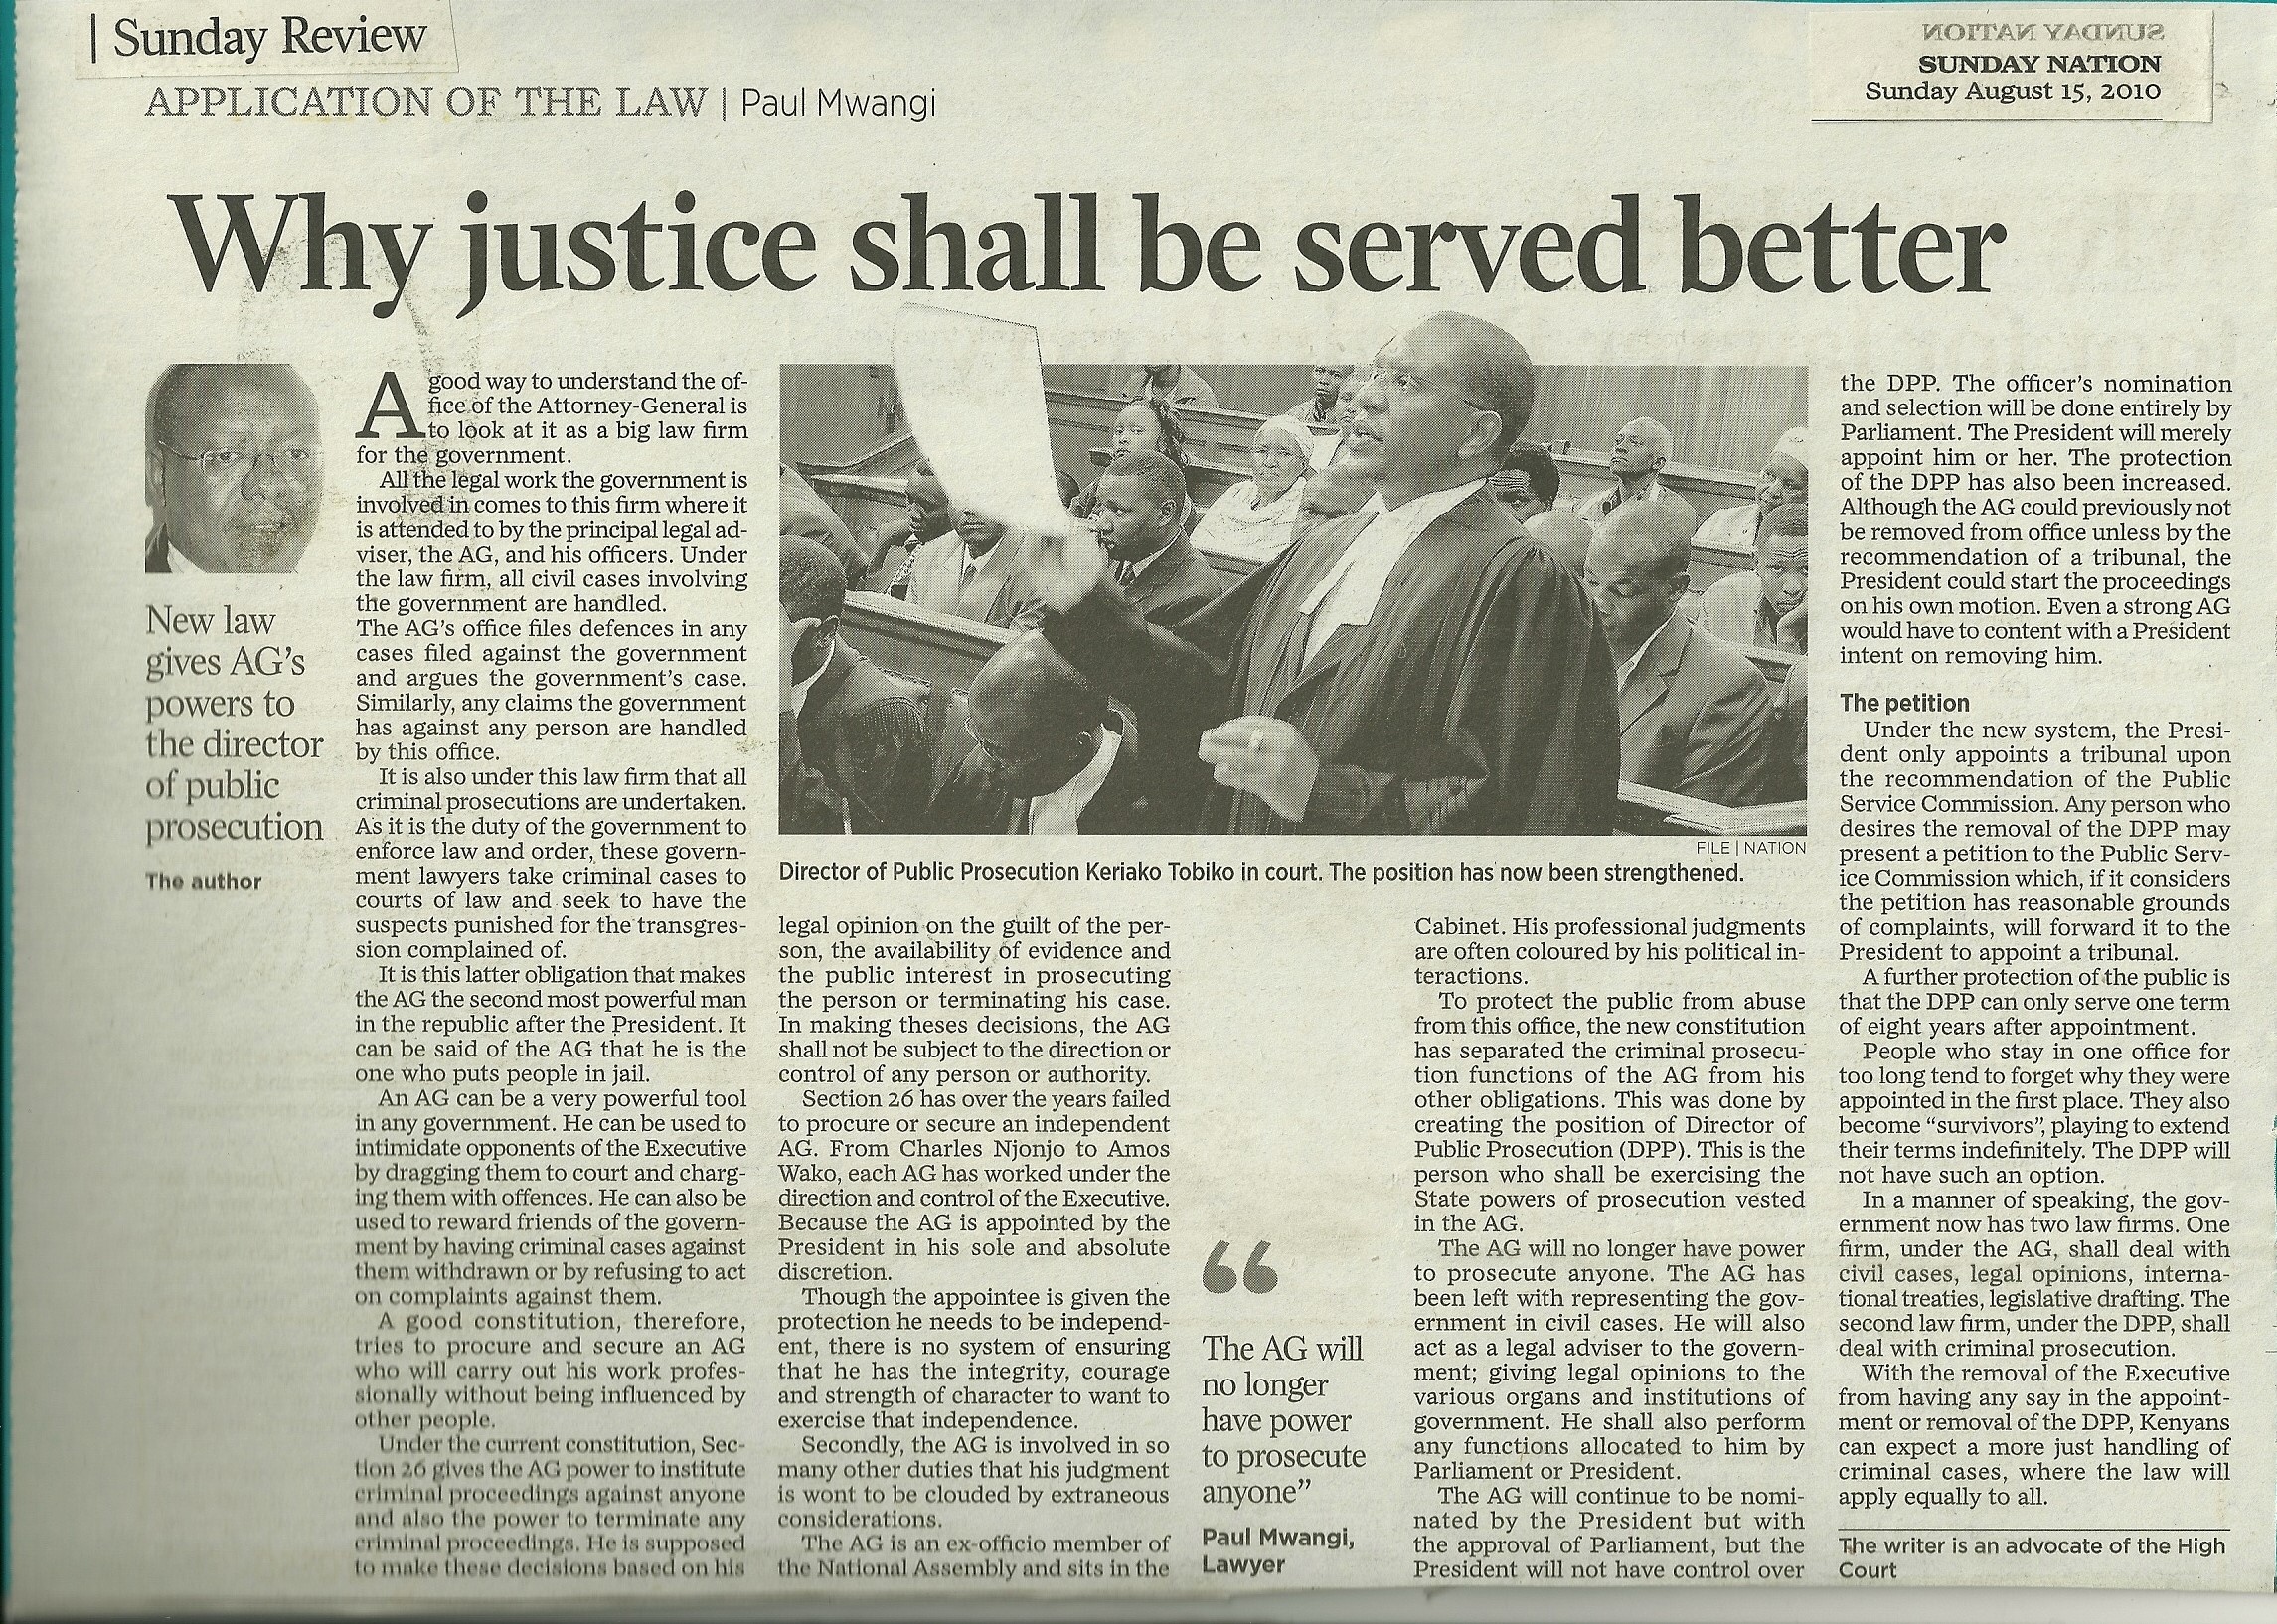 justice shall be served better – Verdict